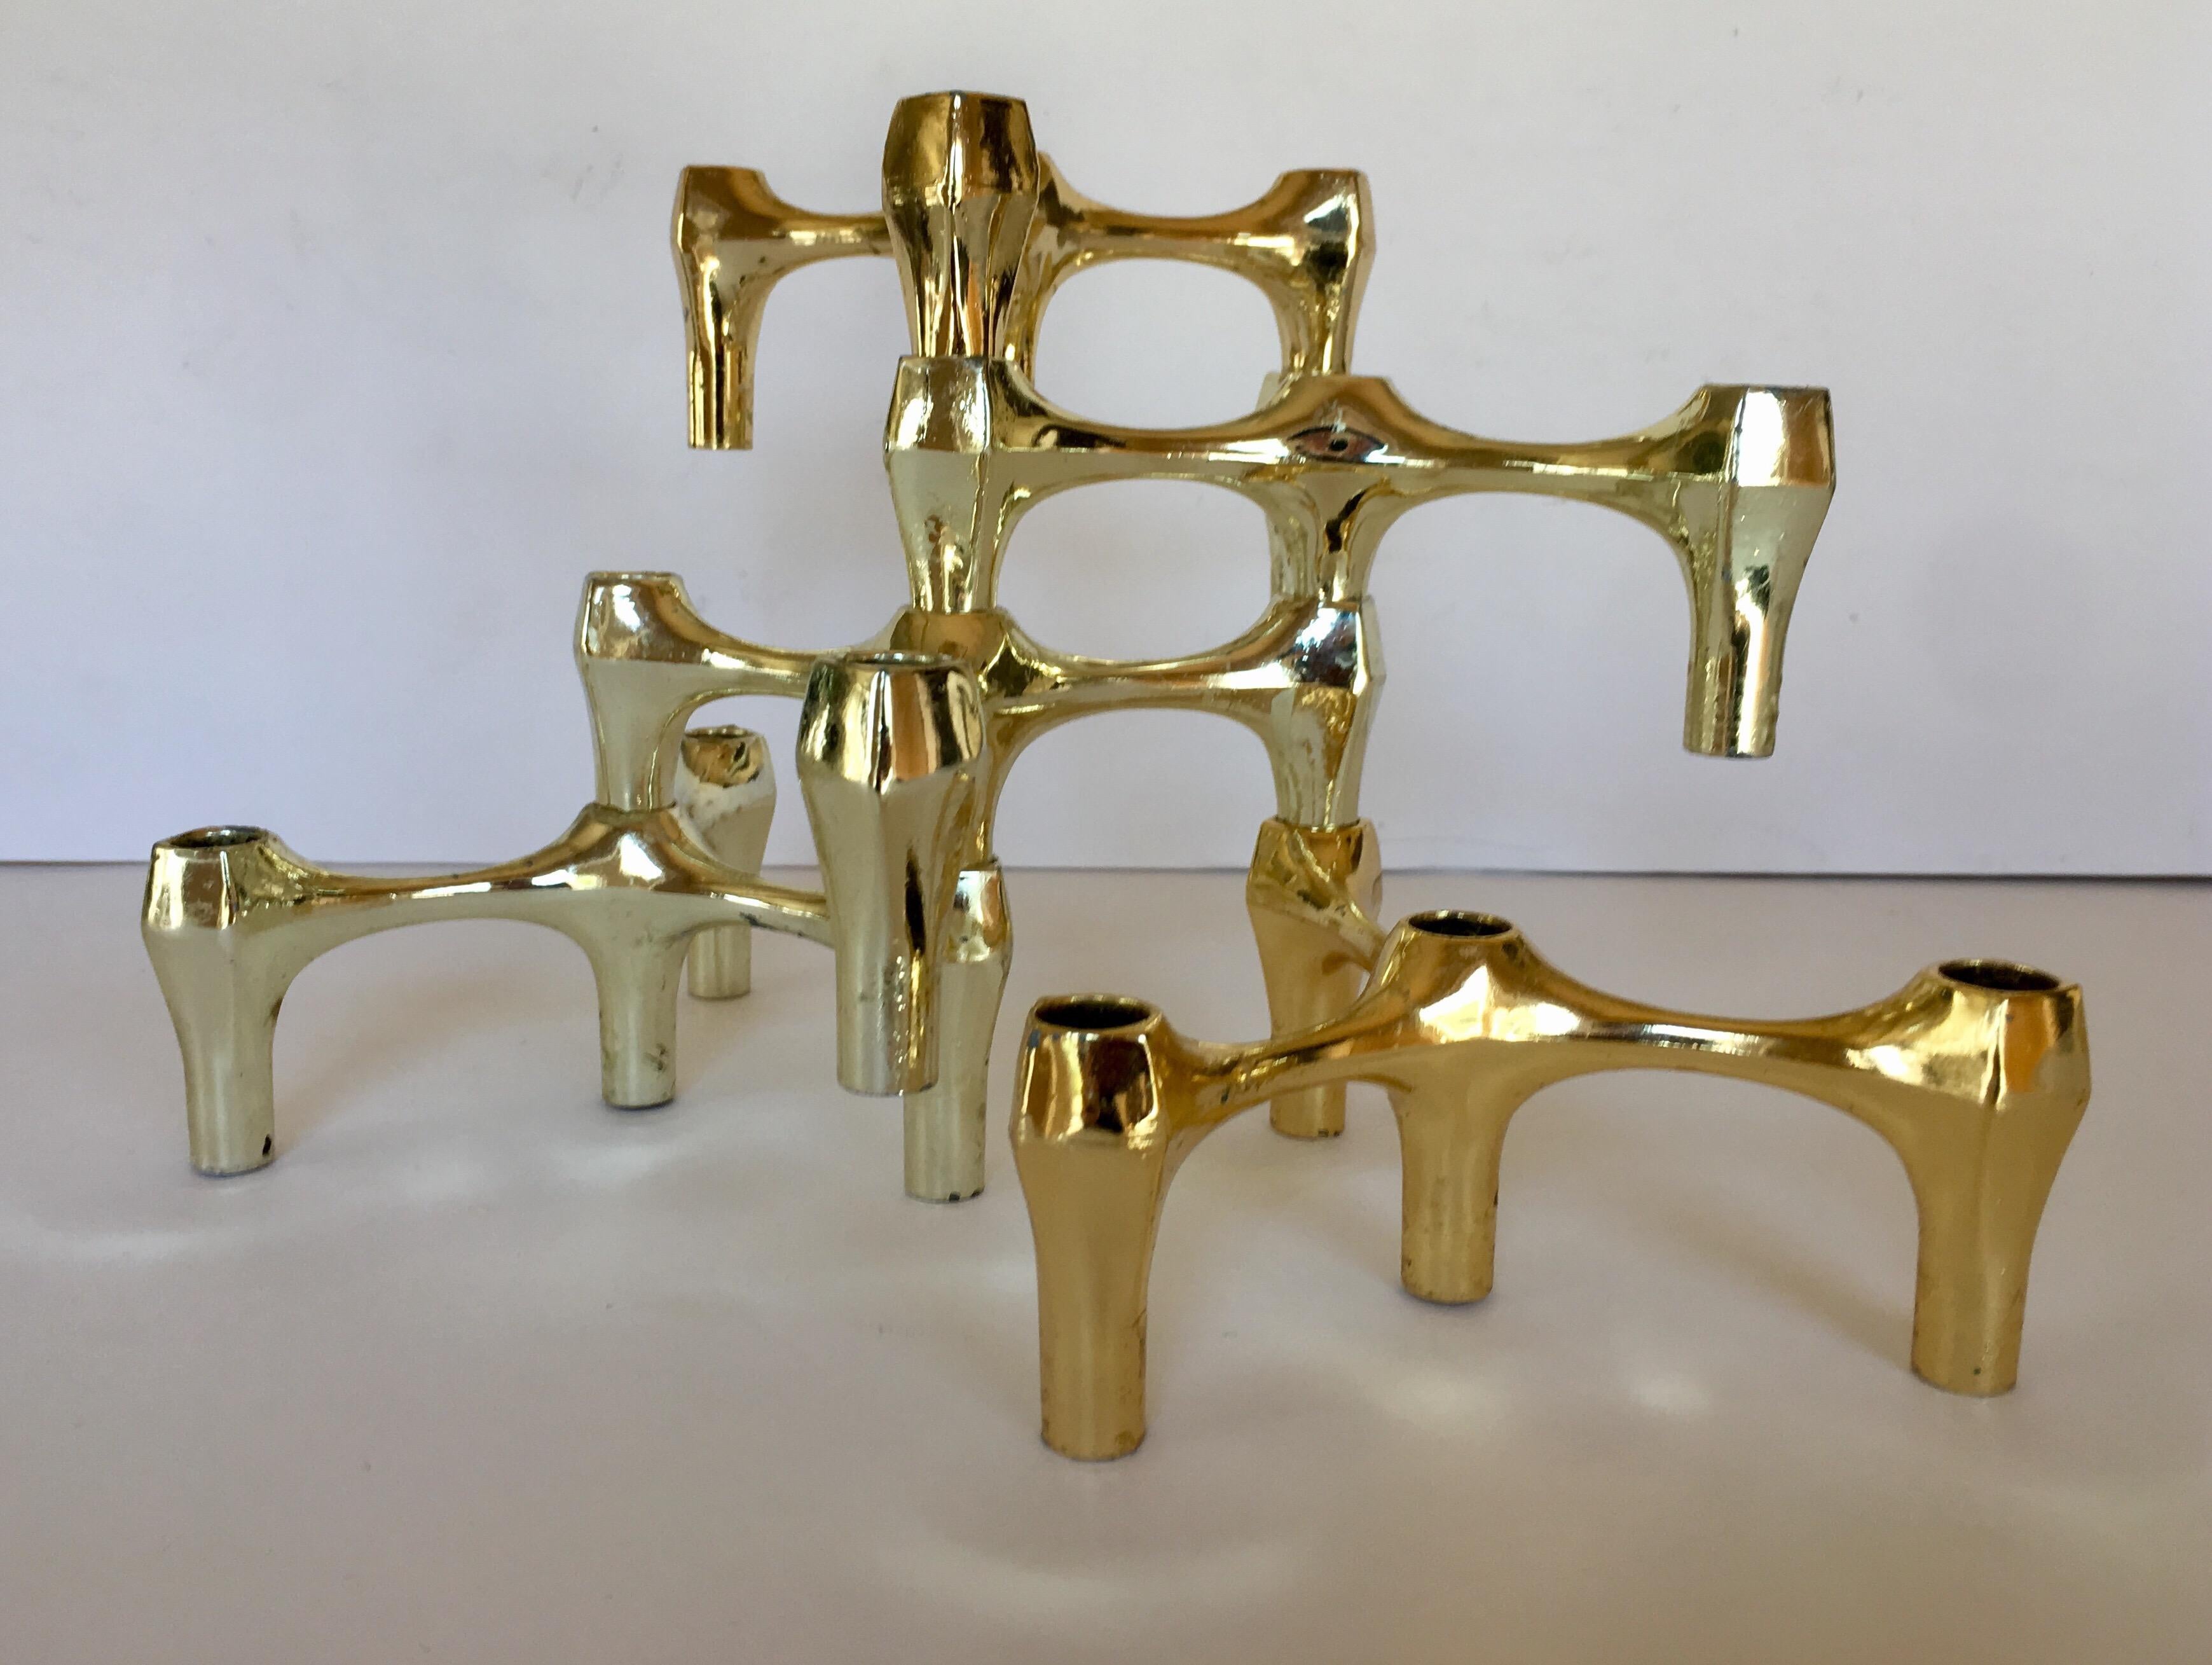 A set of five Mid-Century Modern Fritz Nagel style lacquered brass stacking candleholder sculptures. An iconic mid-20th century design that can be stacked and displayed in countless configurations. A fabulous and unique abstract form tabletop